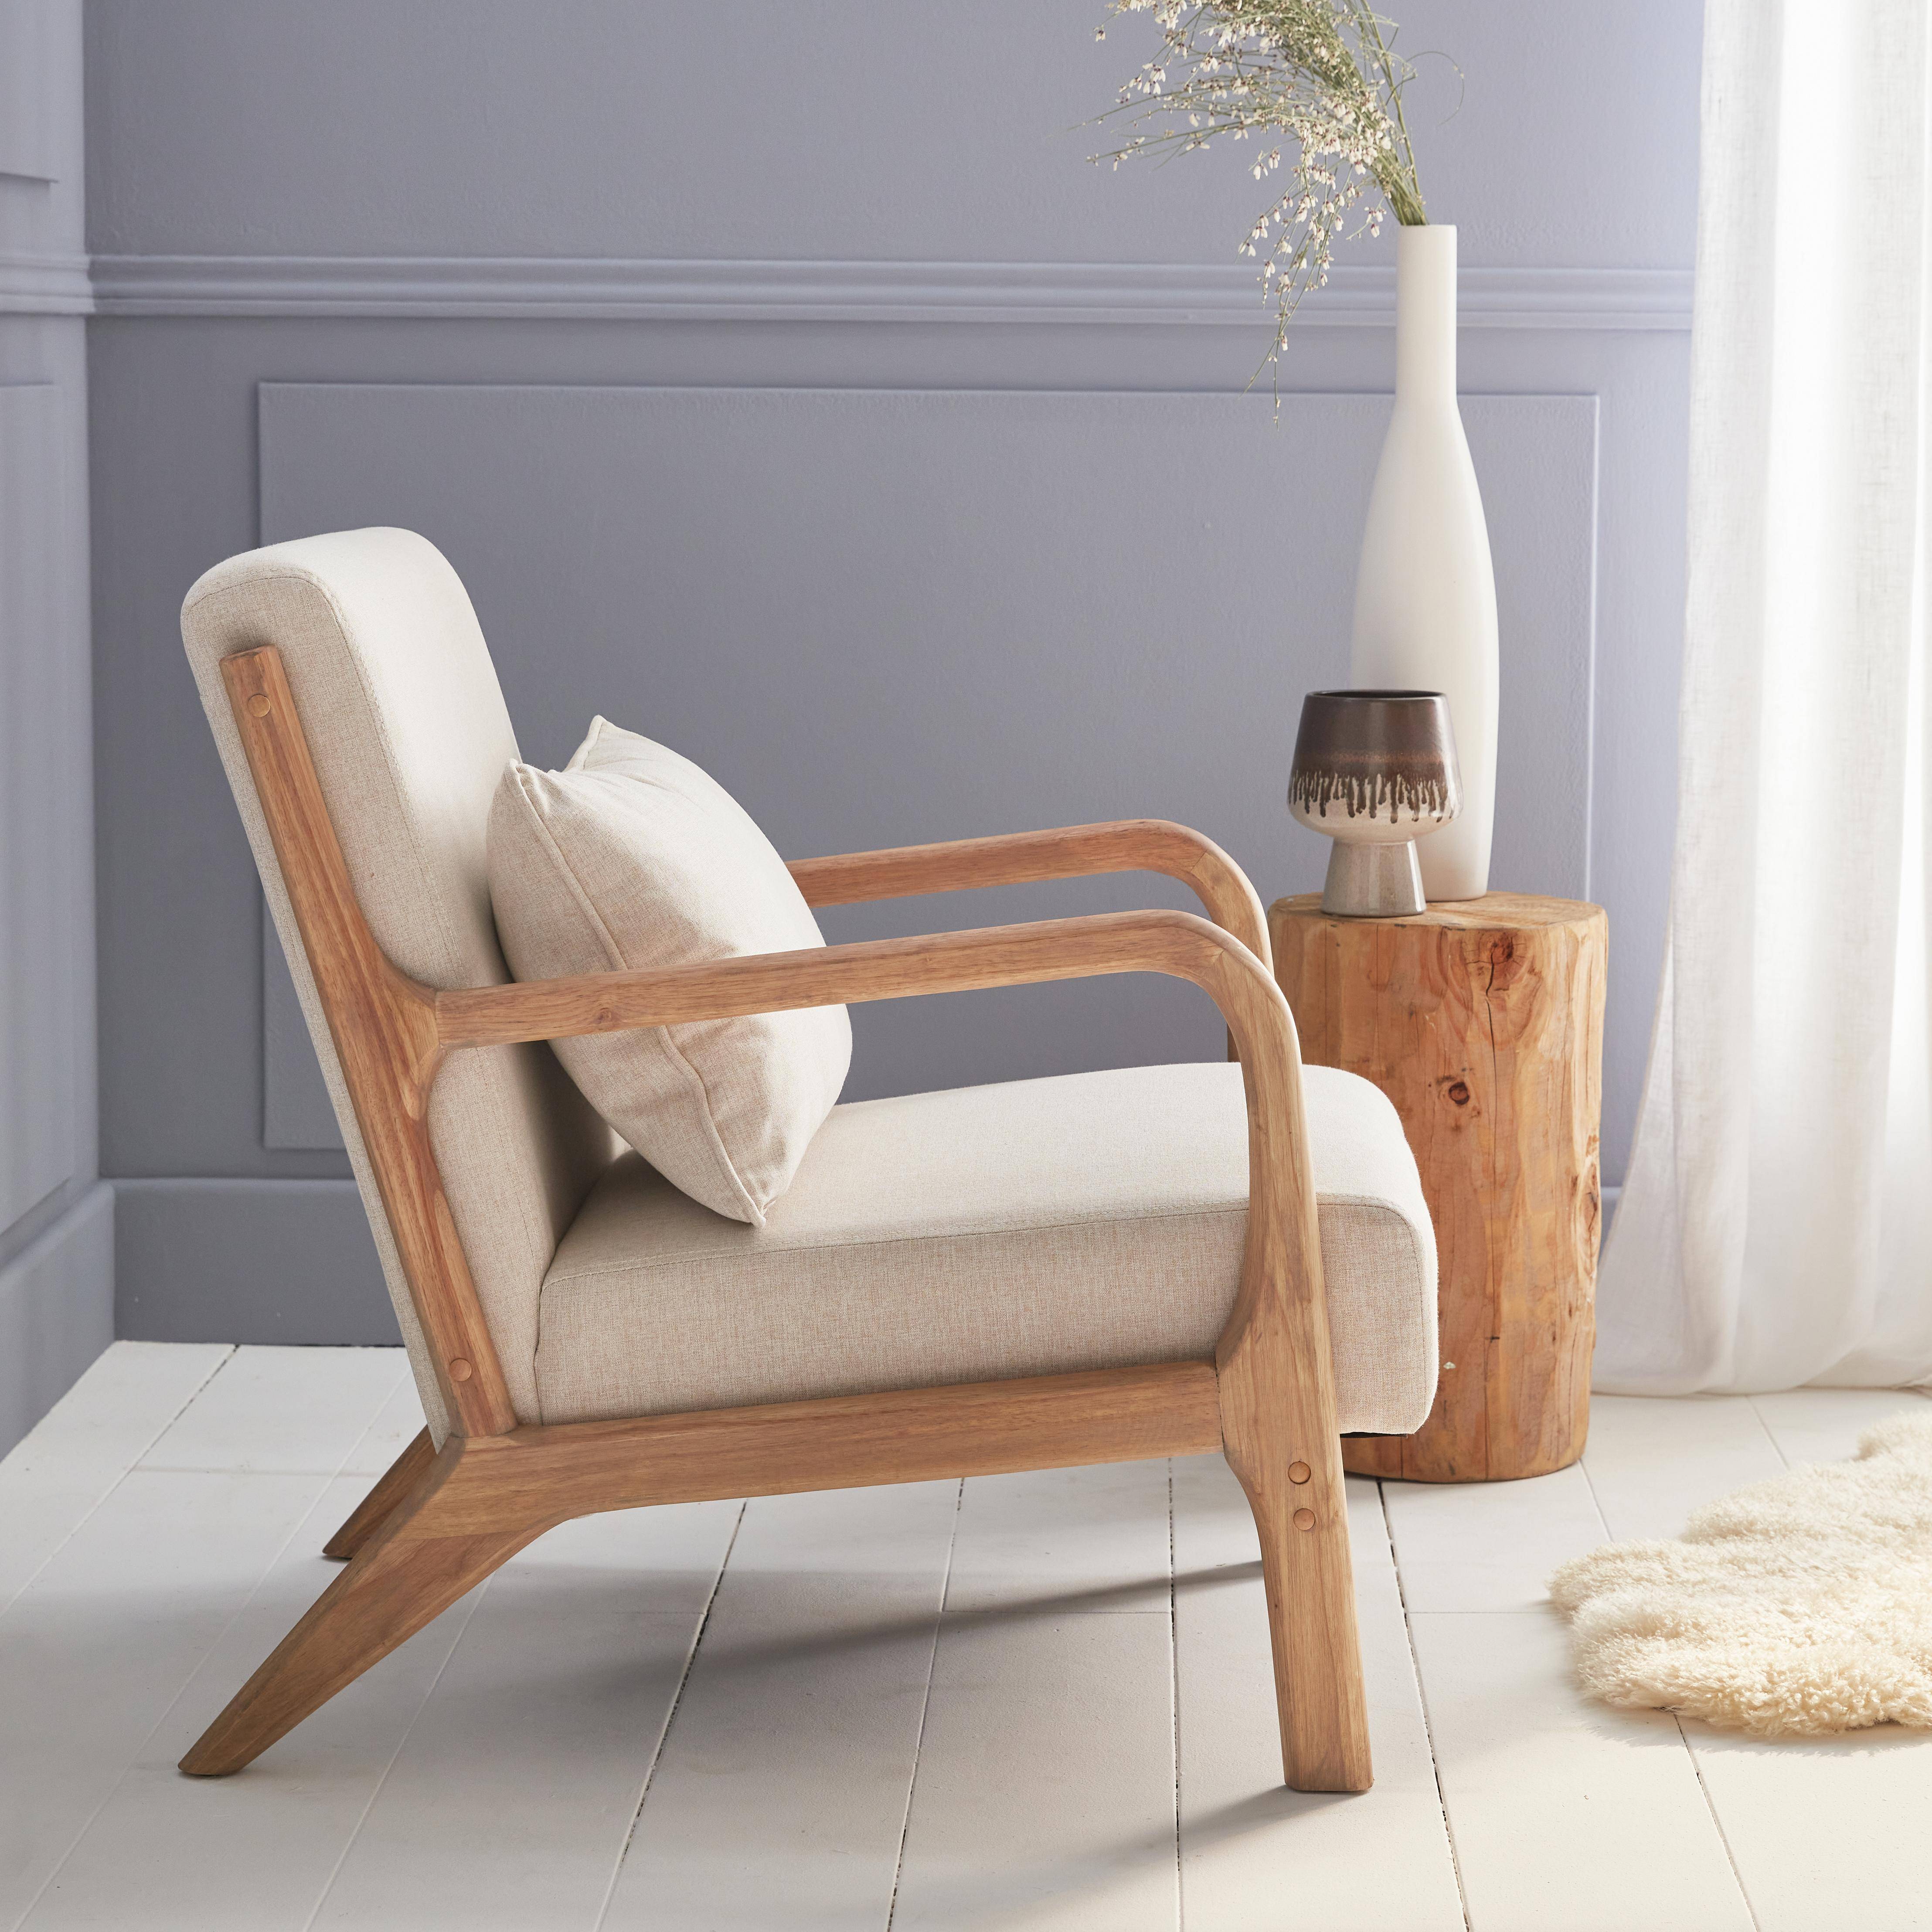 Wooden armchair with scandi-style compass legs and cushion - Lorens - Beige,sweeek,Photo2